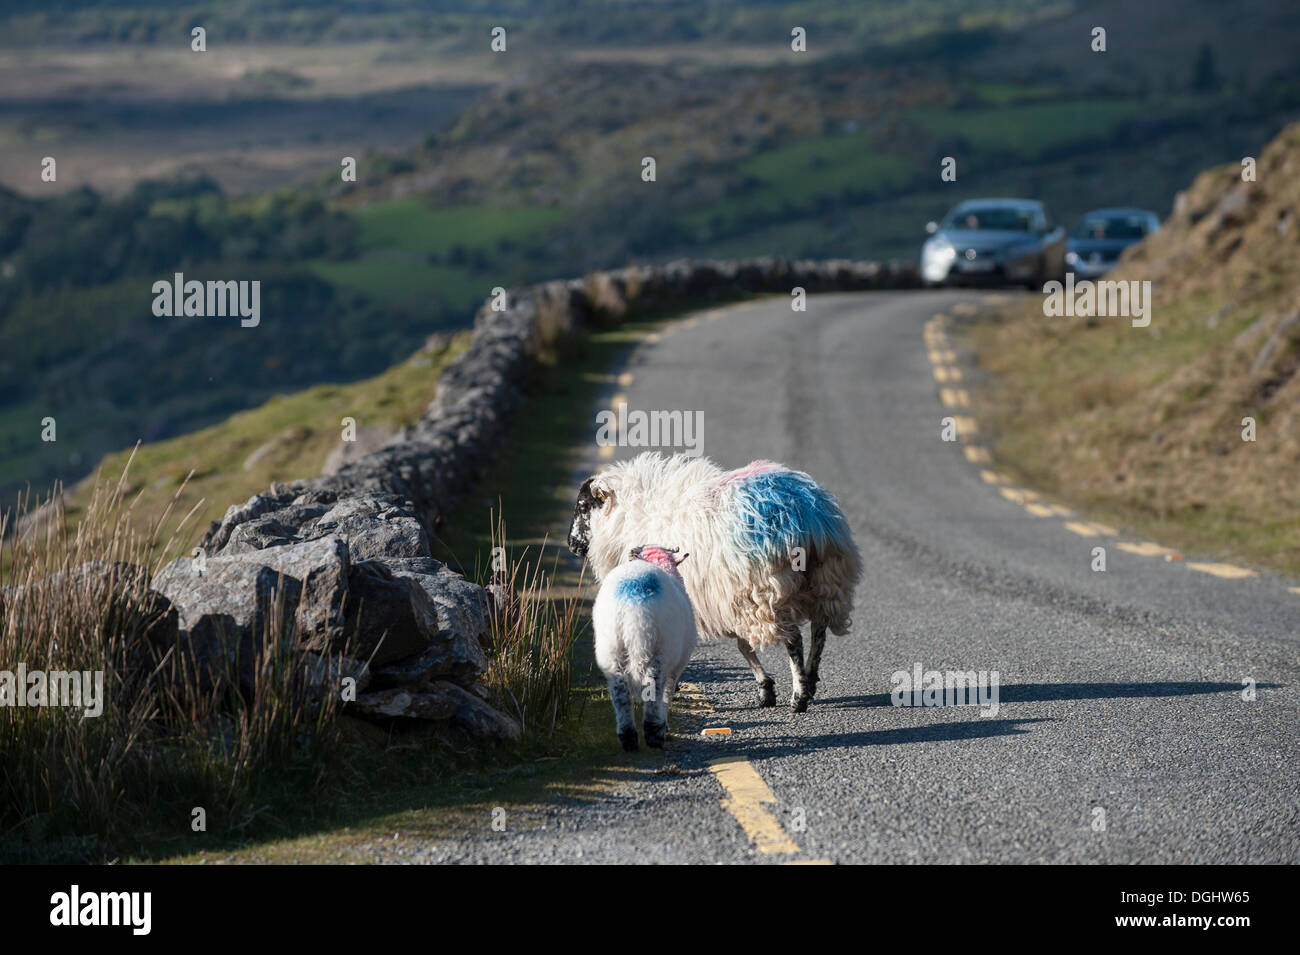 Sheep standing on an Irish country road, with oncoming cars, Ireland, Europe Stock Photo